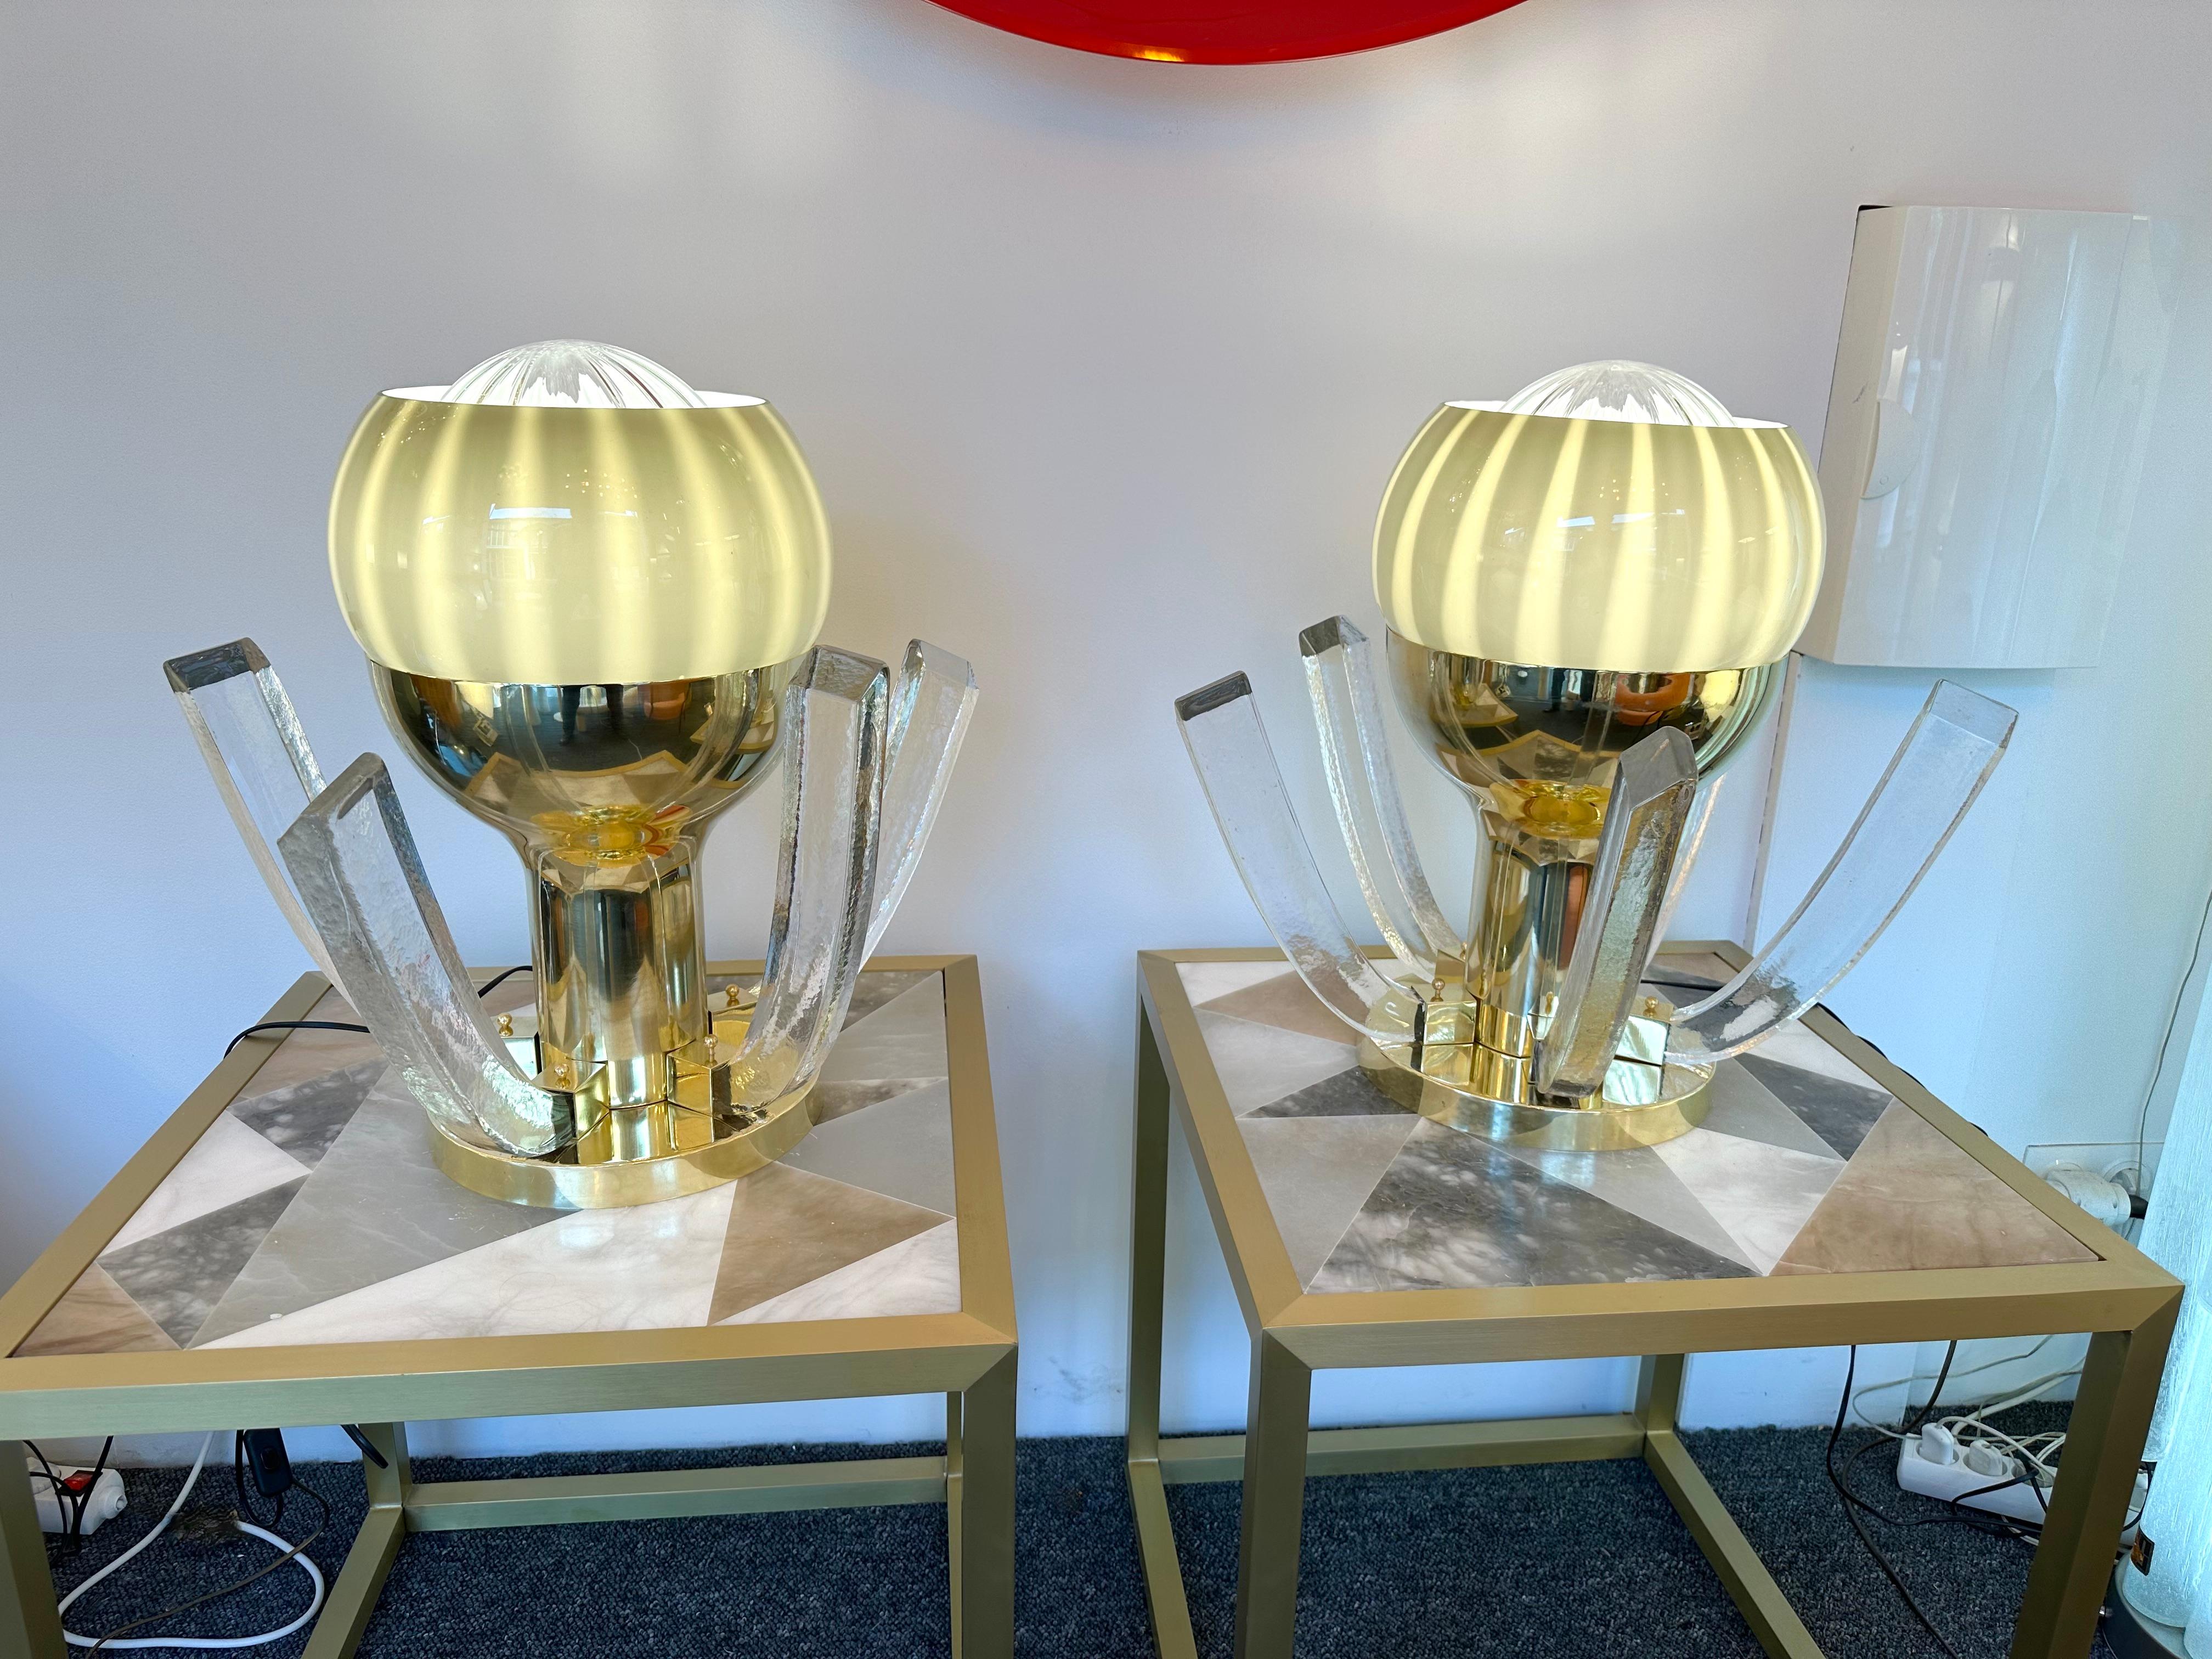 Pair of table or bedside brass flower lamps, gray white interior Murano glass globe and massive glass horn. Contemporary work from a small italian artisanal workshop in a Mid-Century Modern Space Age Hollywood Regency mood.

